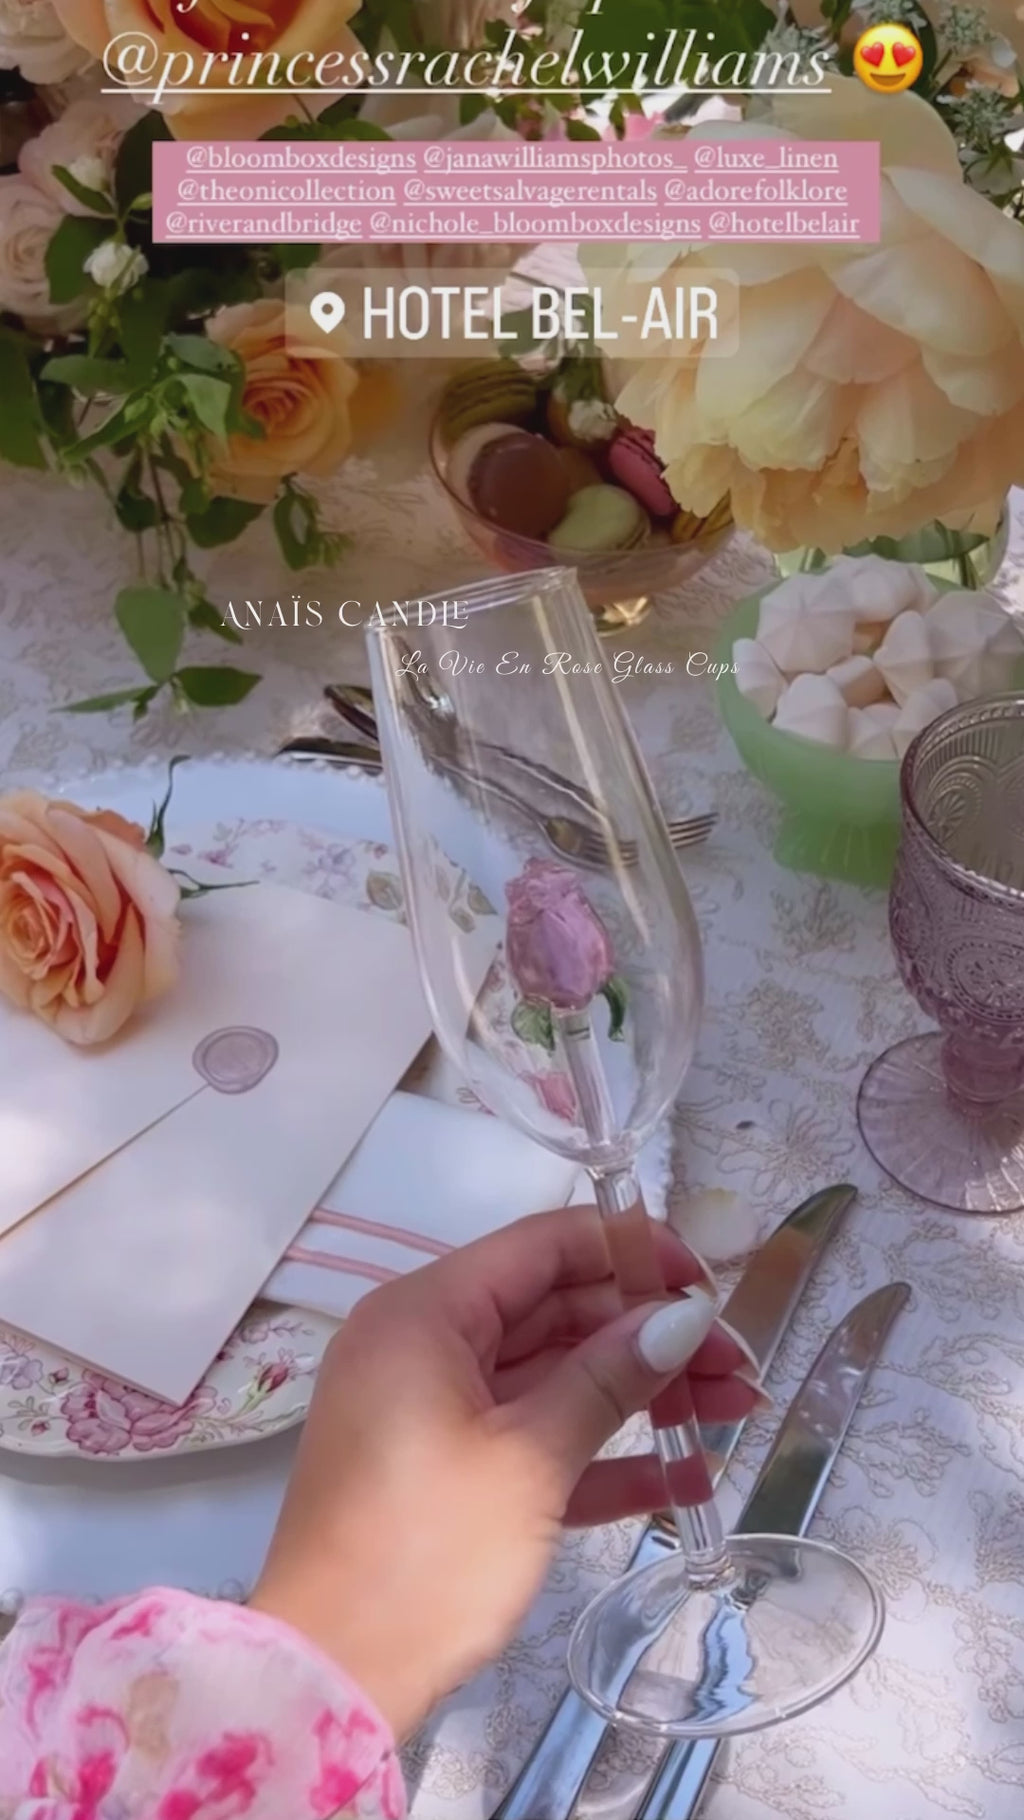 La Vie En Rose Champagne Glass Set of 2 - Handcrafted promotional video in Hotel Bel-Air.